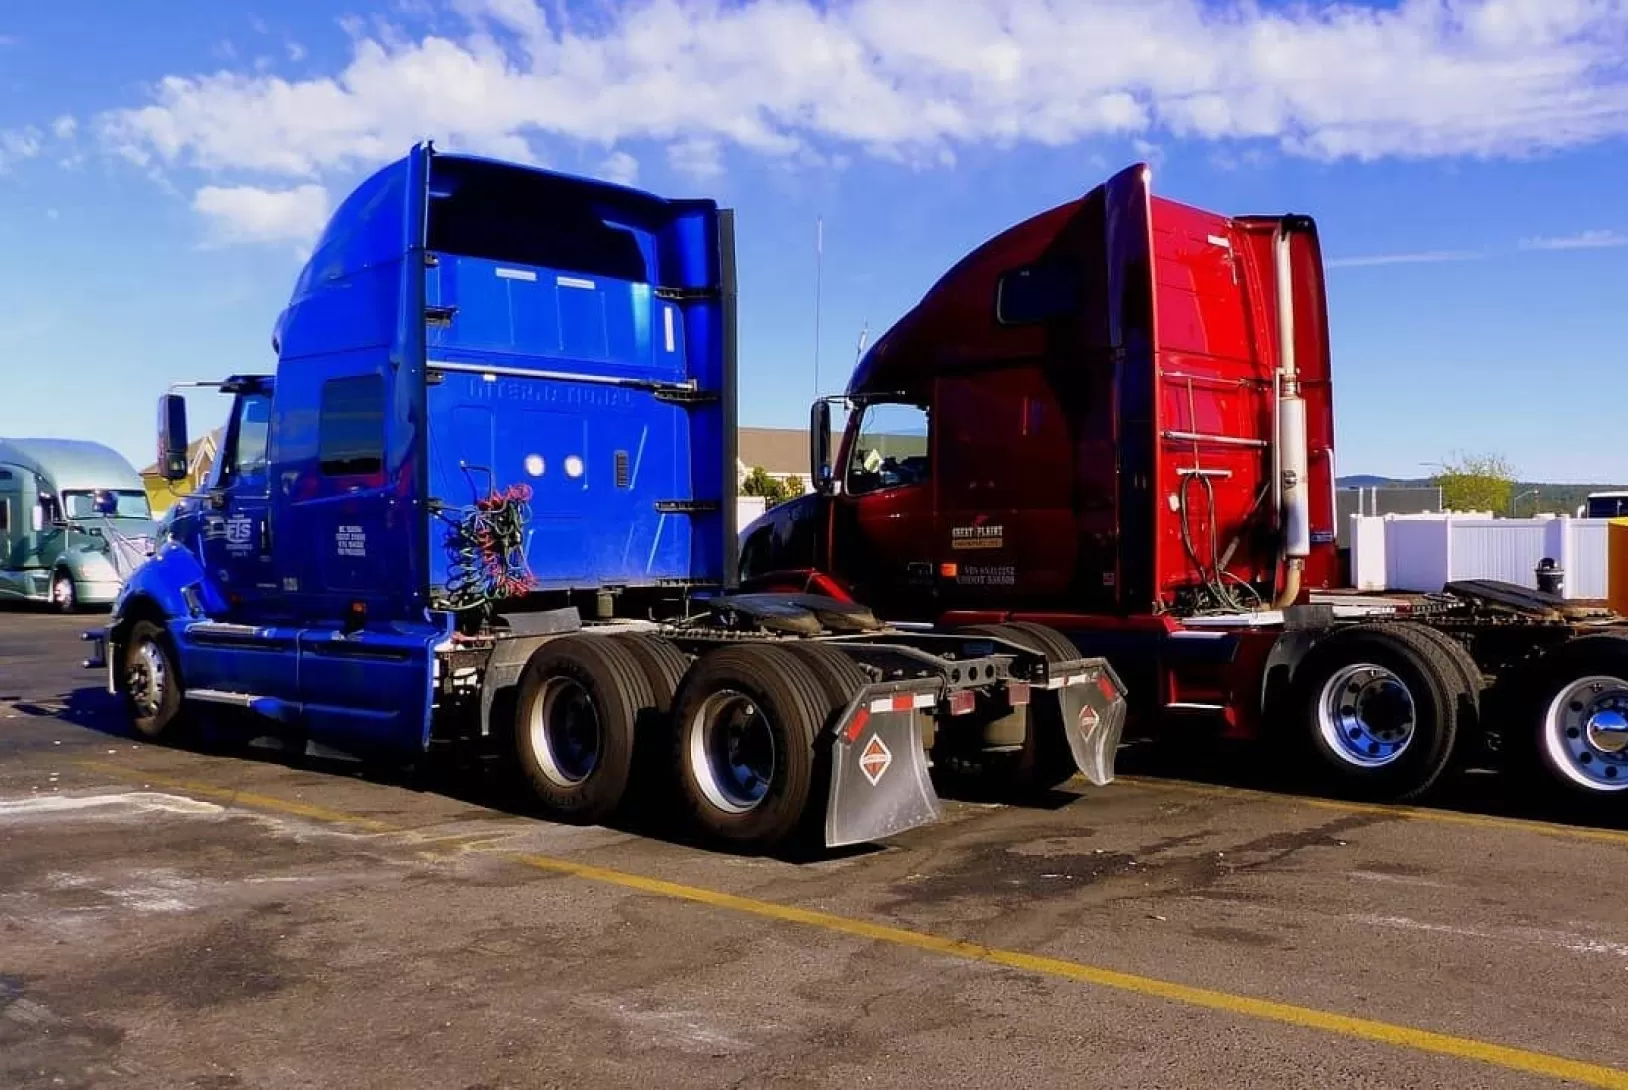 Blue and Red trucks without trailers